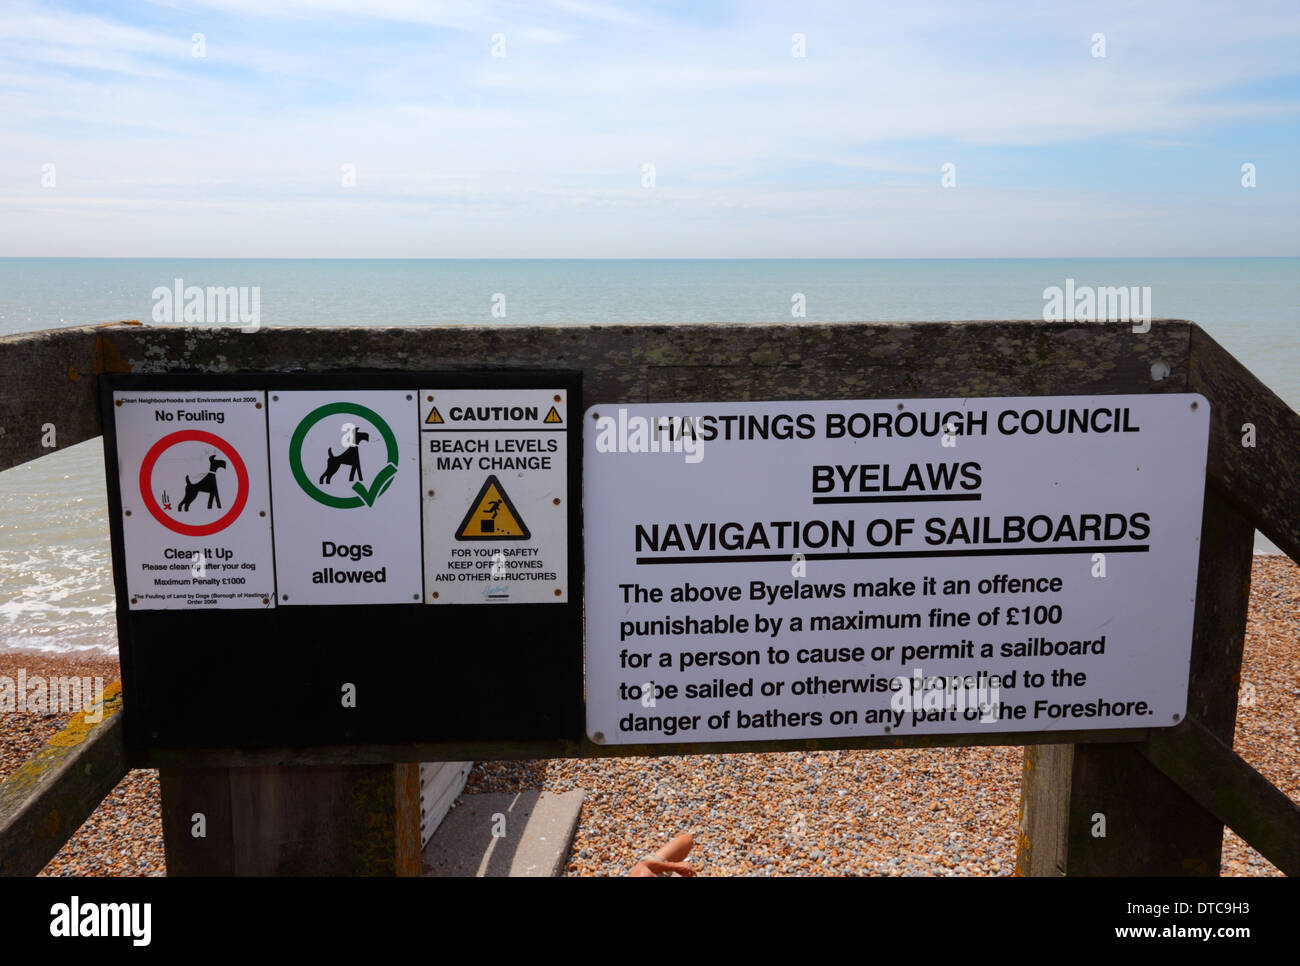 Dogs allowed, no dog fouling, beach levels may change and byelaws for using sailboards signs on beach access point, St Leonards on Sea, East Sussex Stock Photo